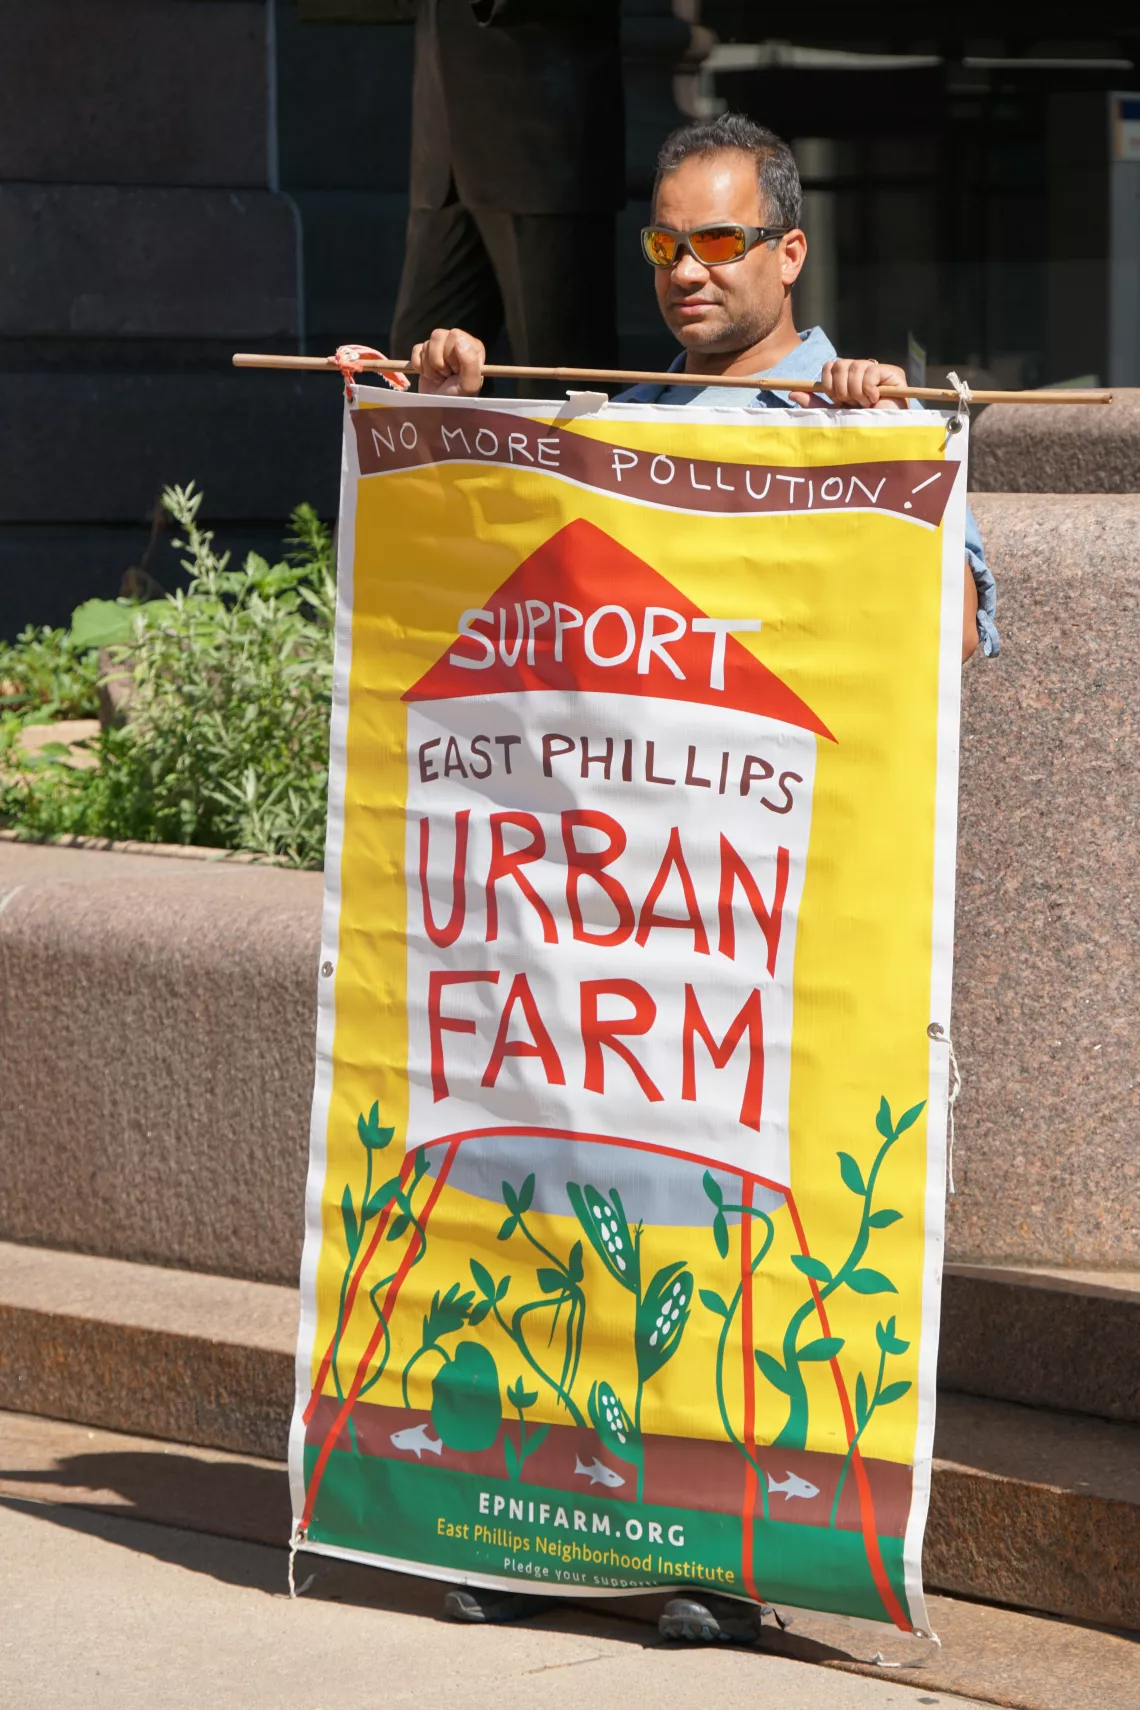 Satish Desai, the author, hold a sign at a press conference outside City Hall. Photo credit: MCEA/Adam Reinhardt